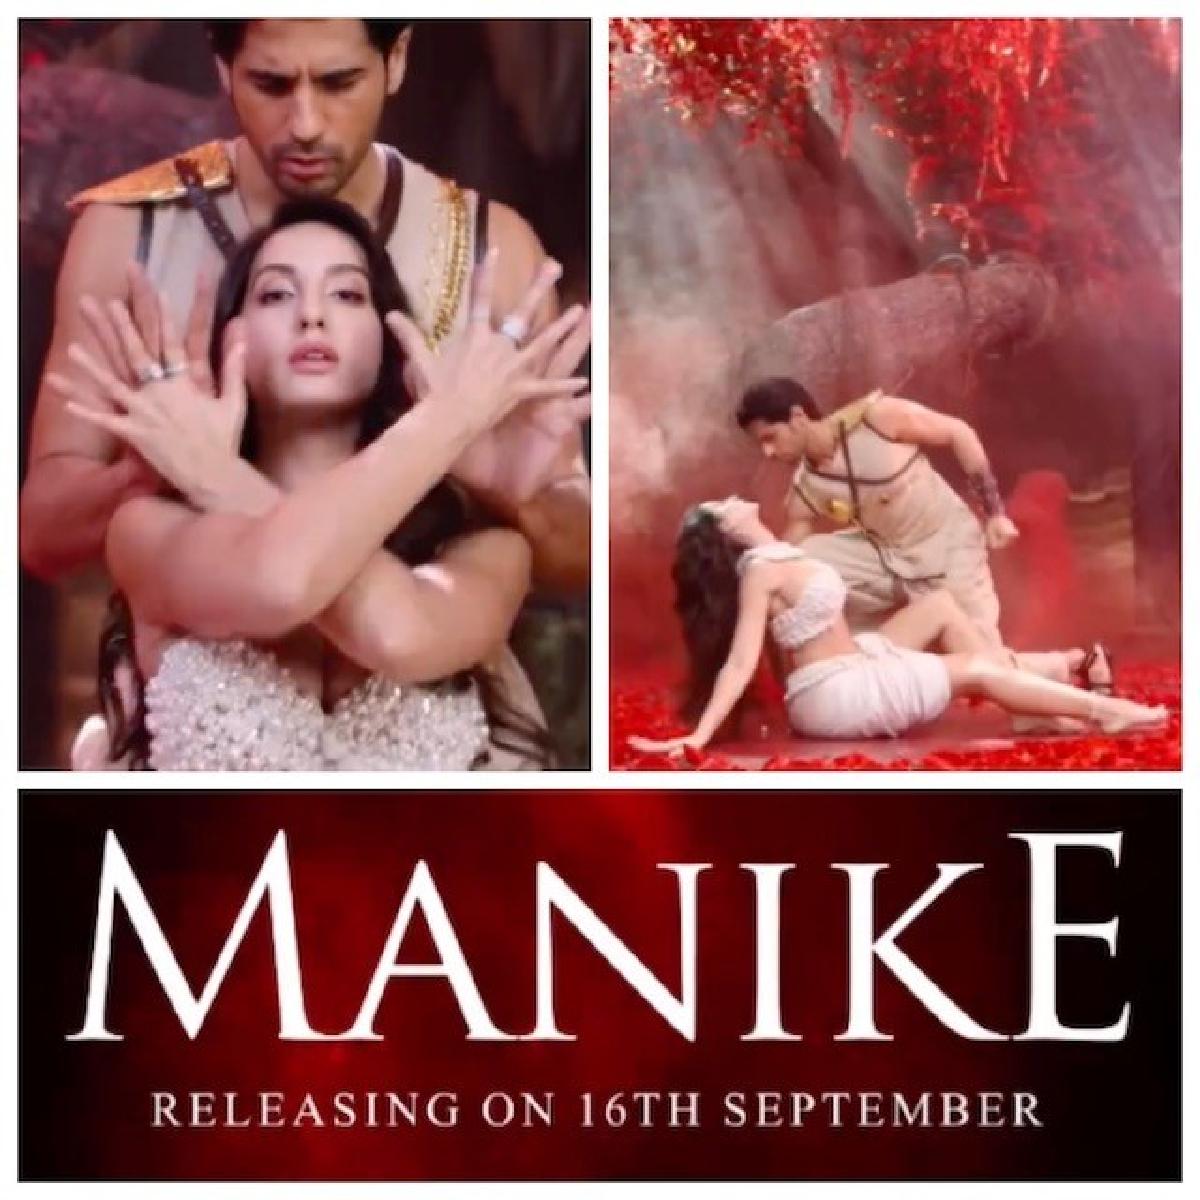 Manike From Thank God Out Soon, Feat, Nora Fatehi And Sidharth Malhotra